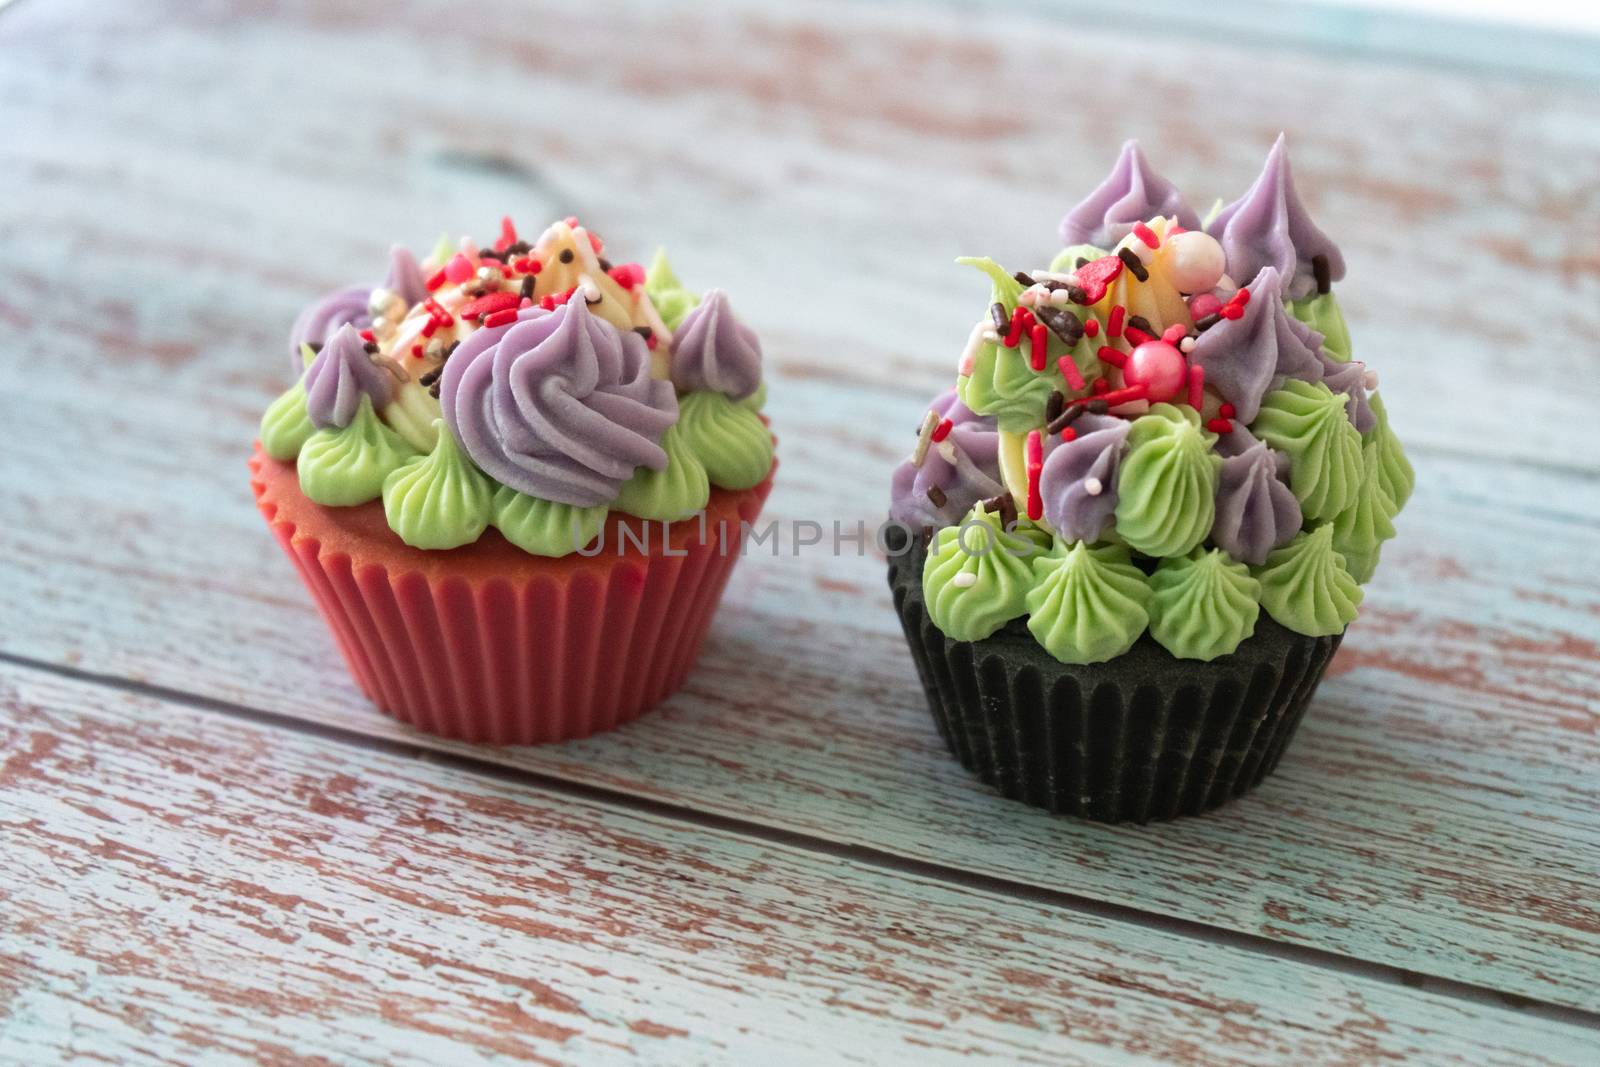 Beautiful cupcakes soap with purple and green icing on pink and dark chocolate base with candy sprinkles placed on a wooden backdrop . Shows the hobbies skills and small businesses that people are working on during the lockdown